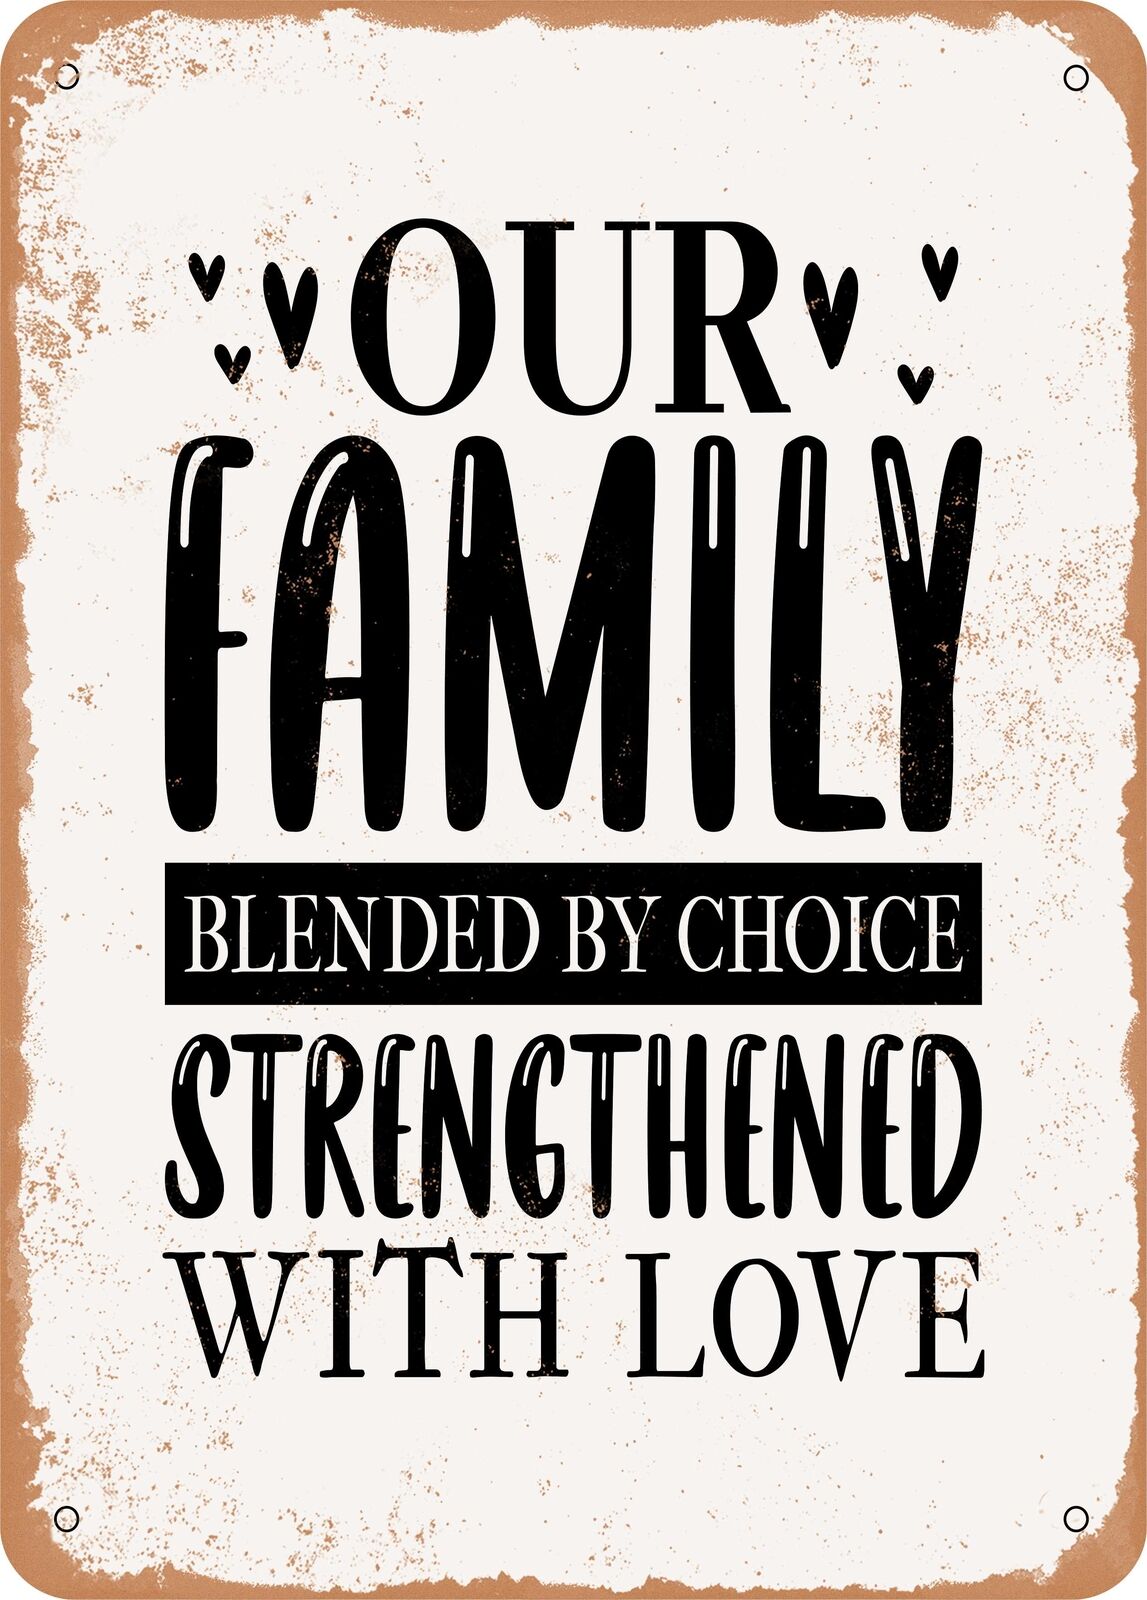 Metal Sign - Our Family Blended by Choice Strengthened With Love - Vintage Look